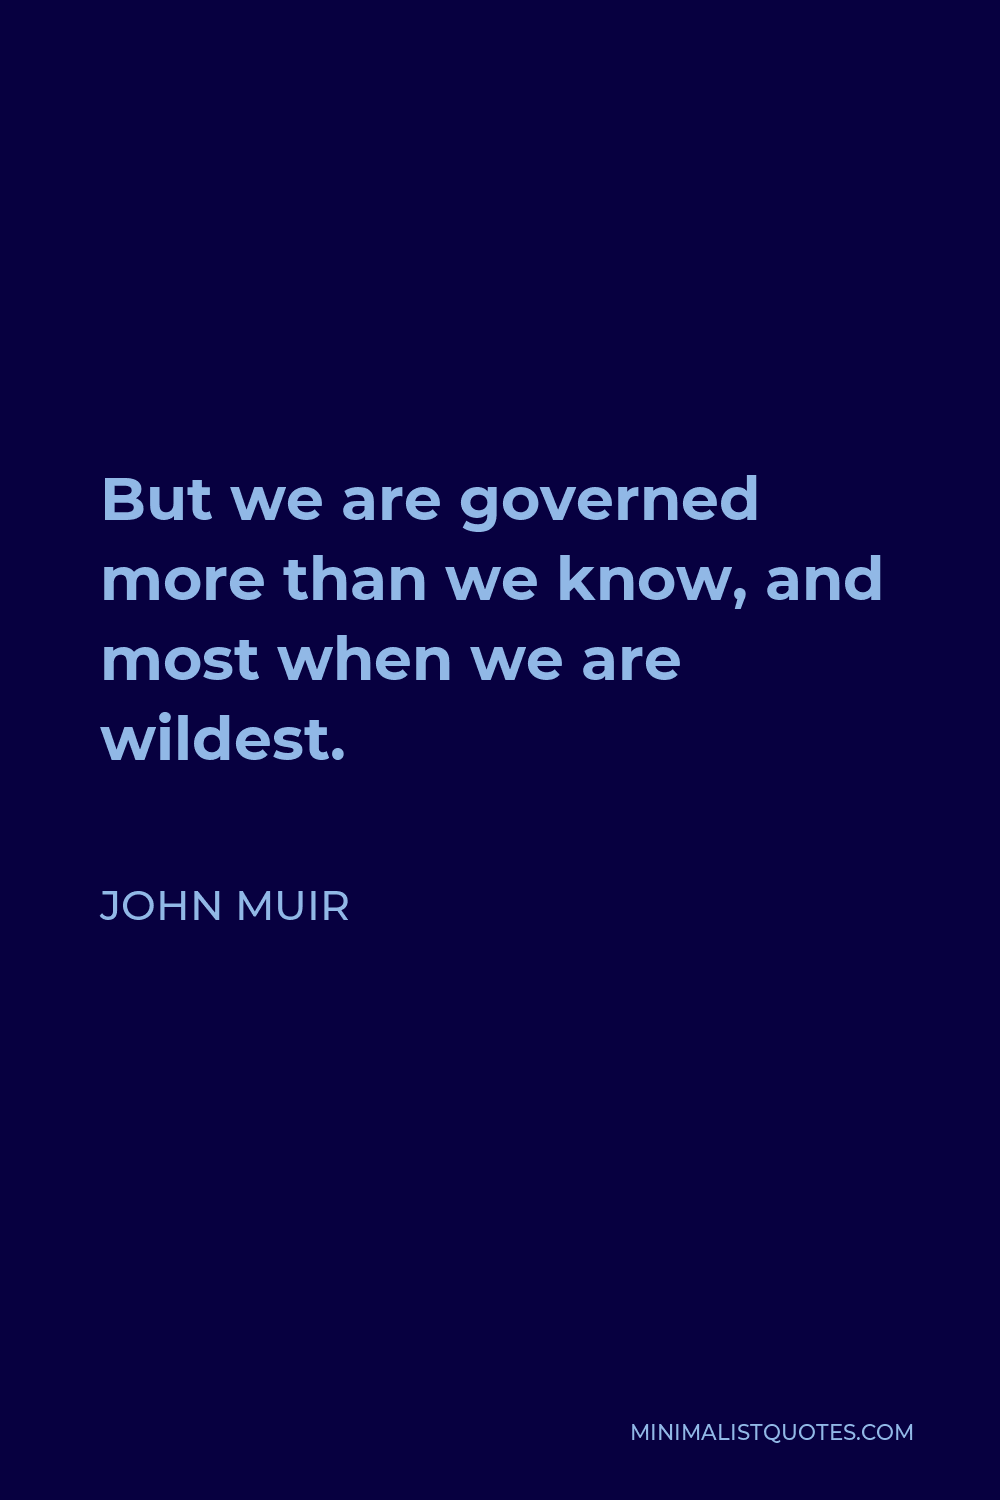 John Muir Quote - But we are governed more than we know, and most when we are wildest.